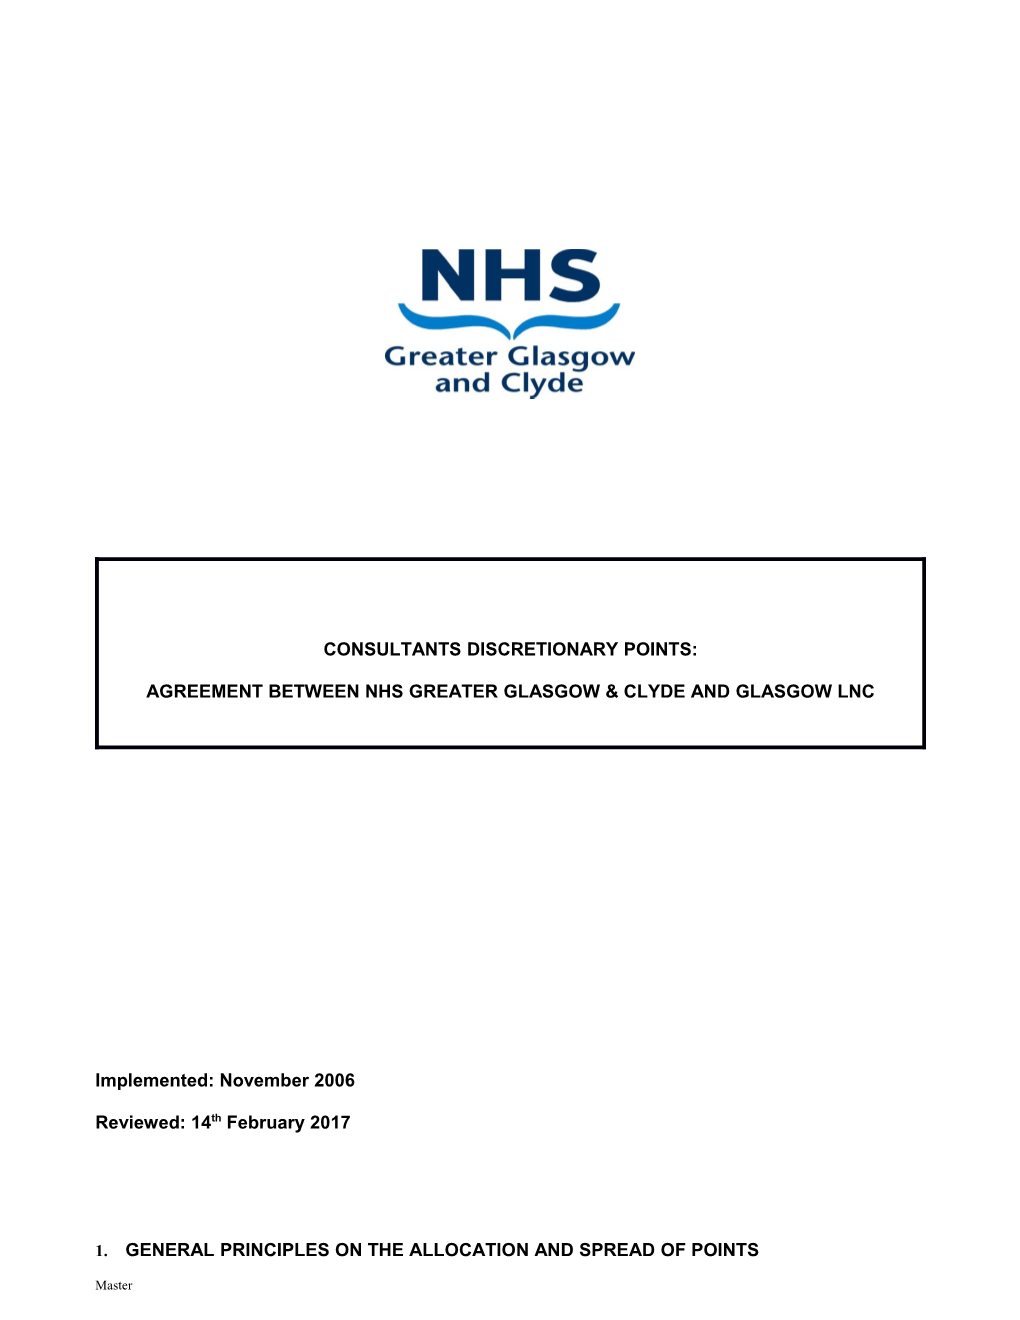 Agreement Between Nhs Greater Glasgow & Clyde Andglasgowlnc